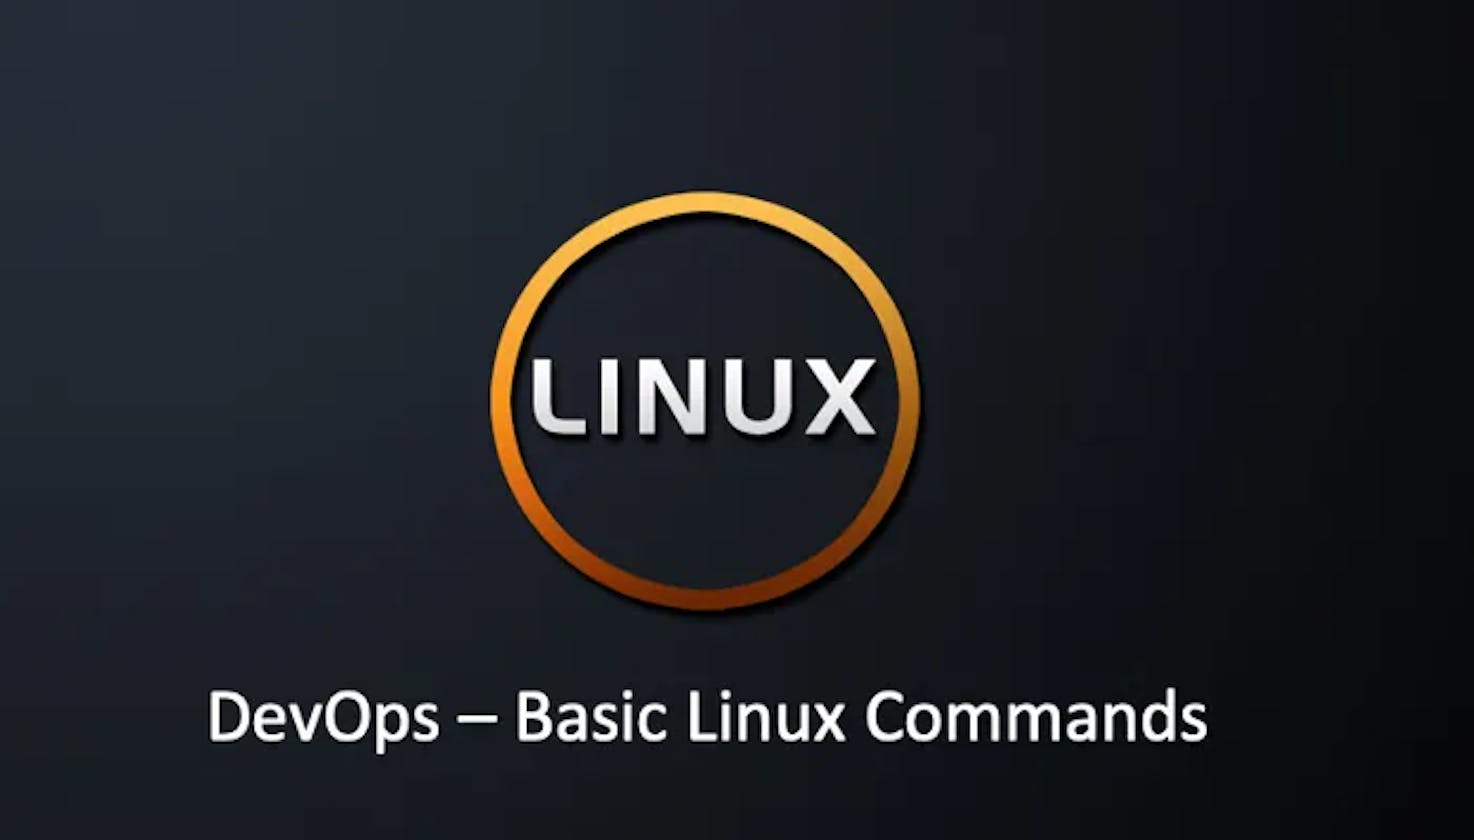 What is Linux & Why it's important for Devops?